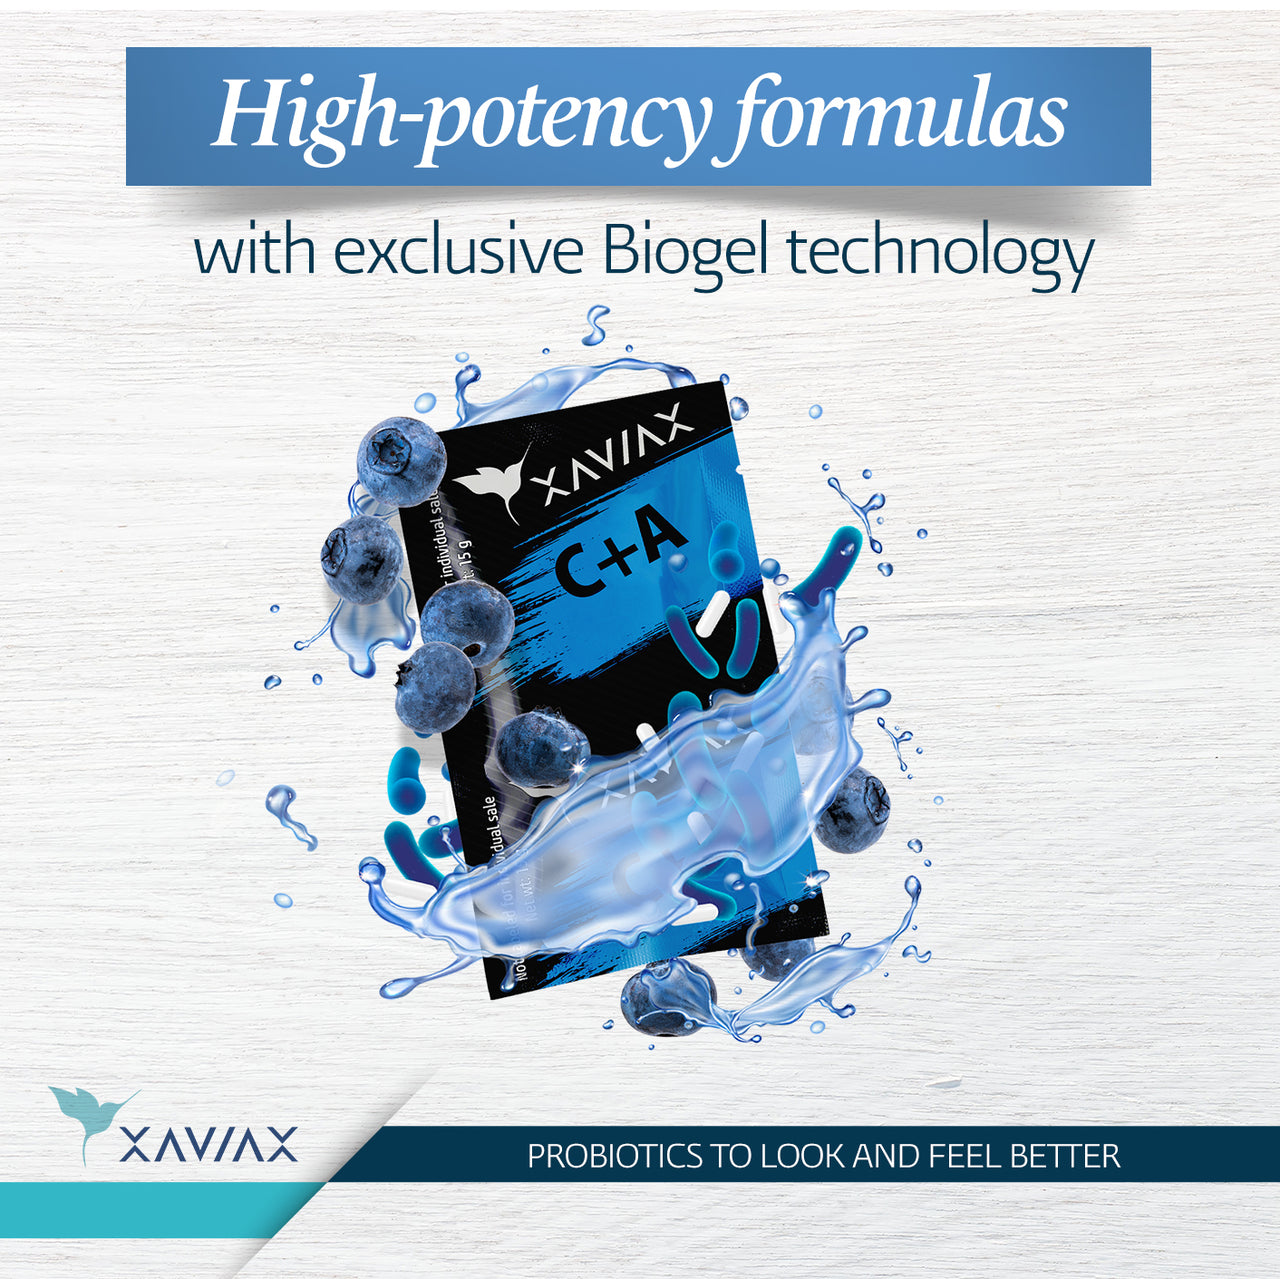 c+a high potency formulas with exclusive biogel technology